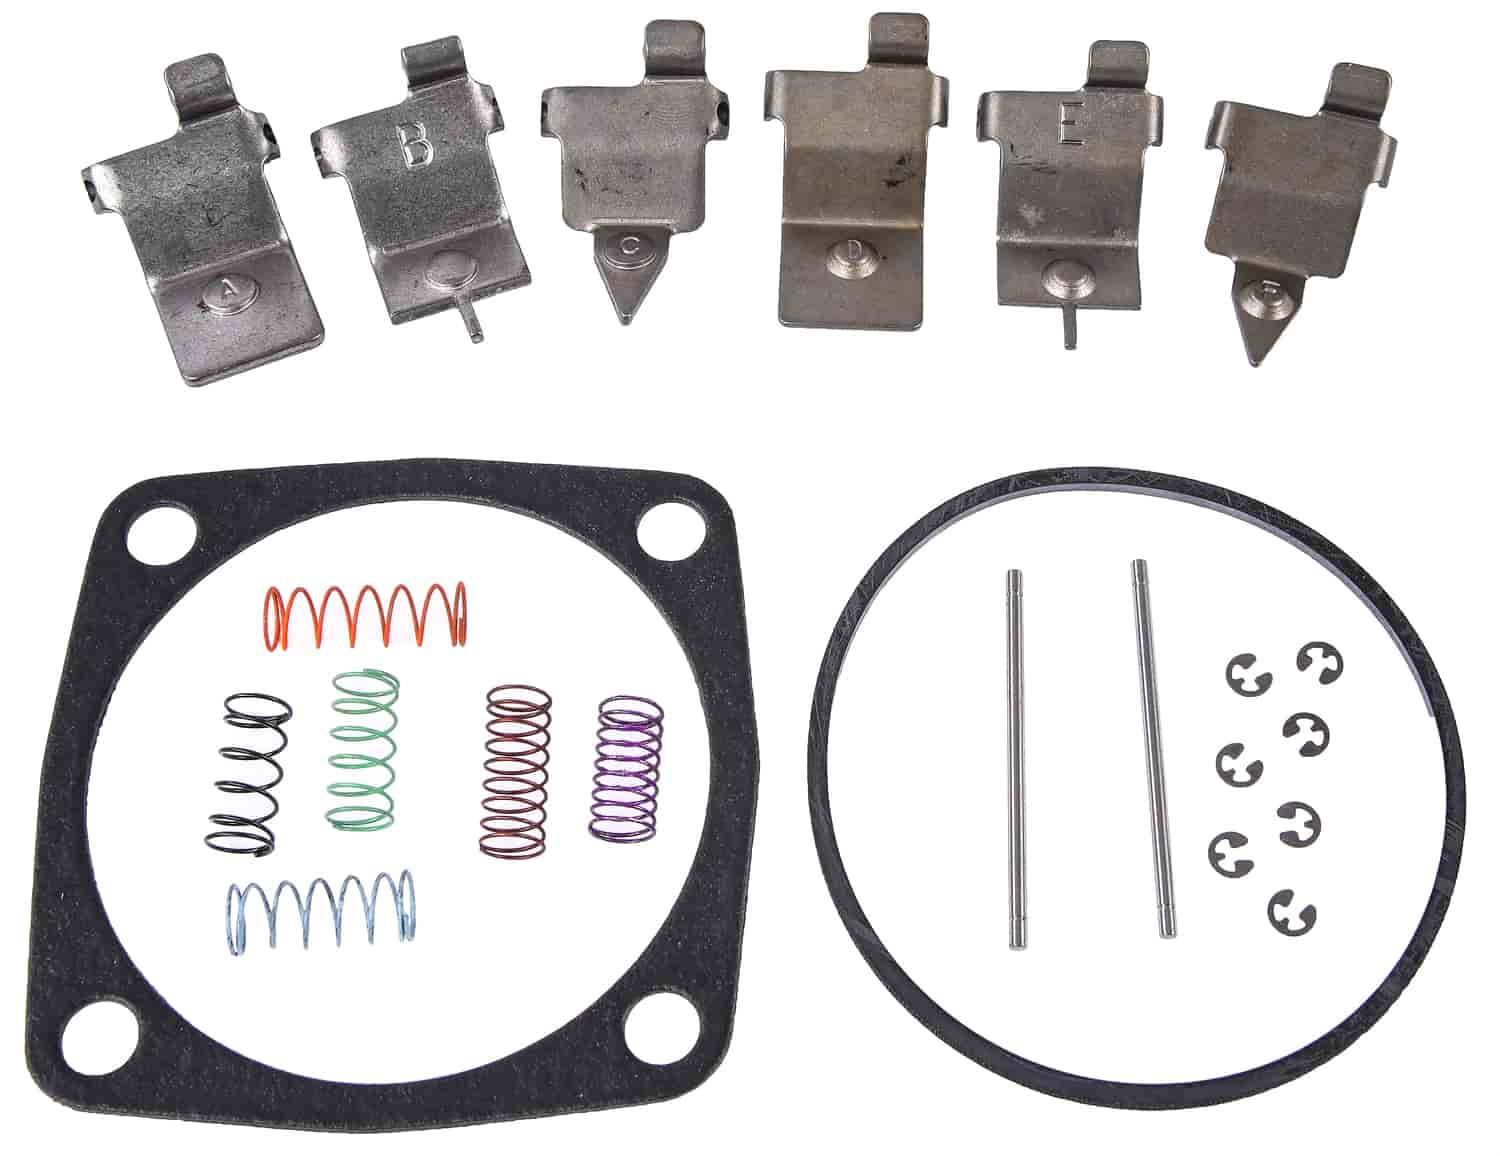 JEGS 62070: Governor Recalibration Kit for GM TH-250, TH-350, TH-400, 700R4  [Includes Springs  Weights] JEGS